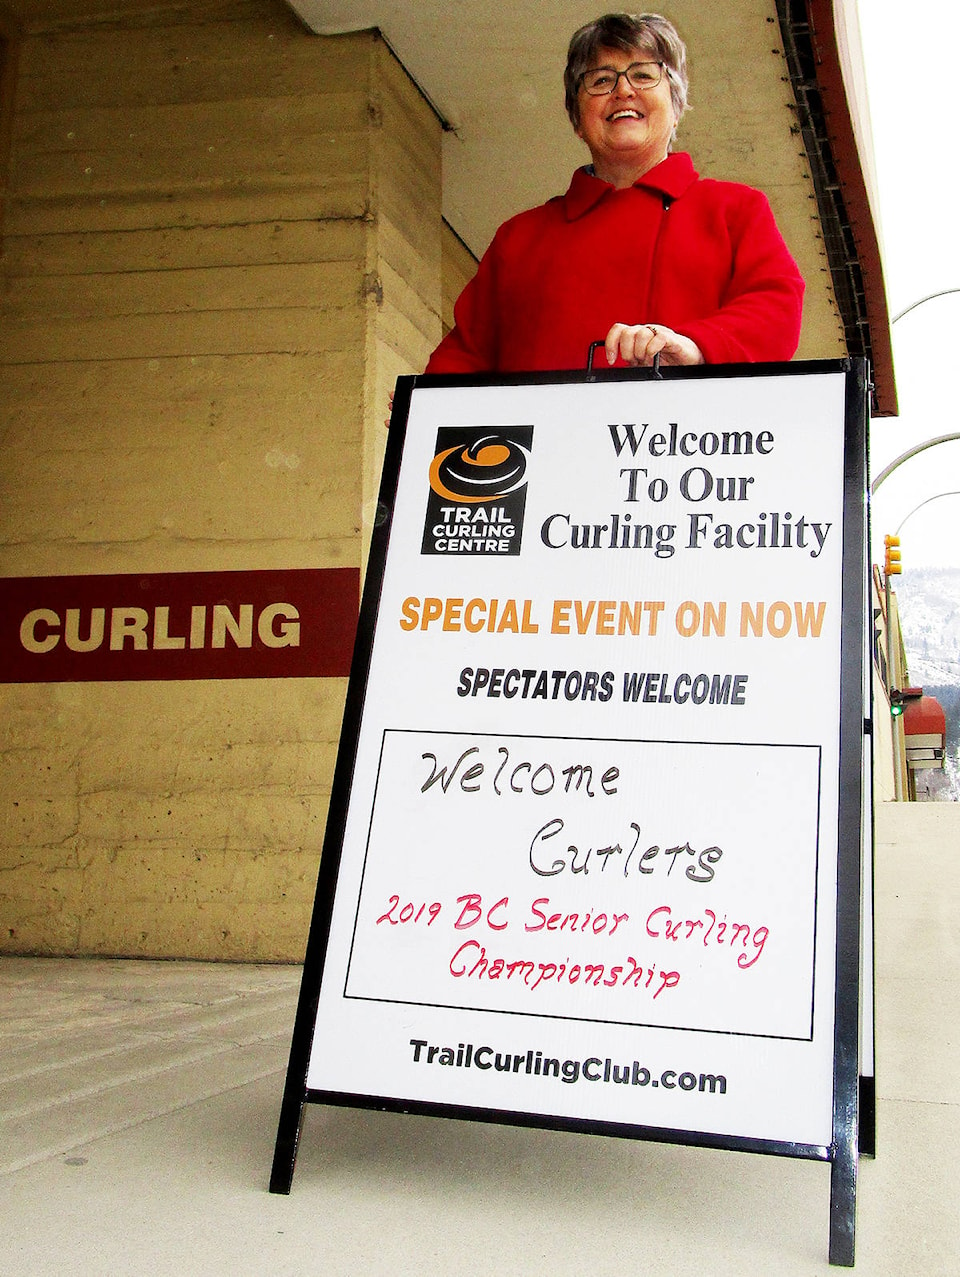 15616457_web1_M190220-TDT-curling-welcome